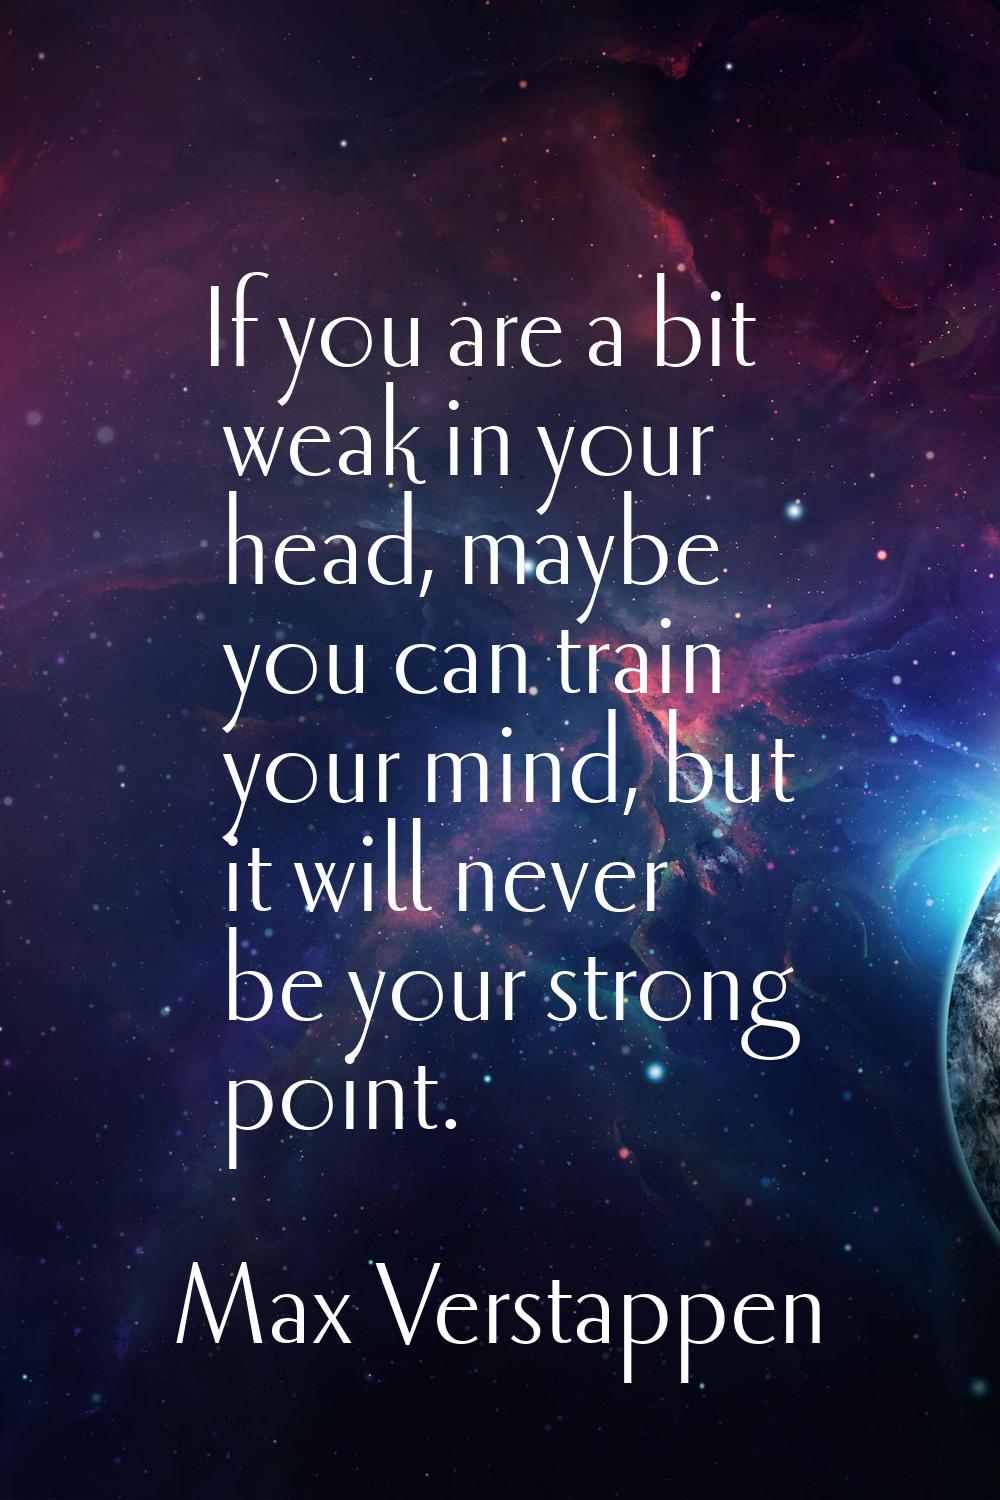 If you are a bit weak in your head, maybe you can train your mind, but it will never be your strong